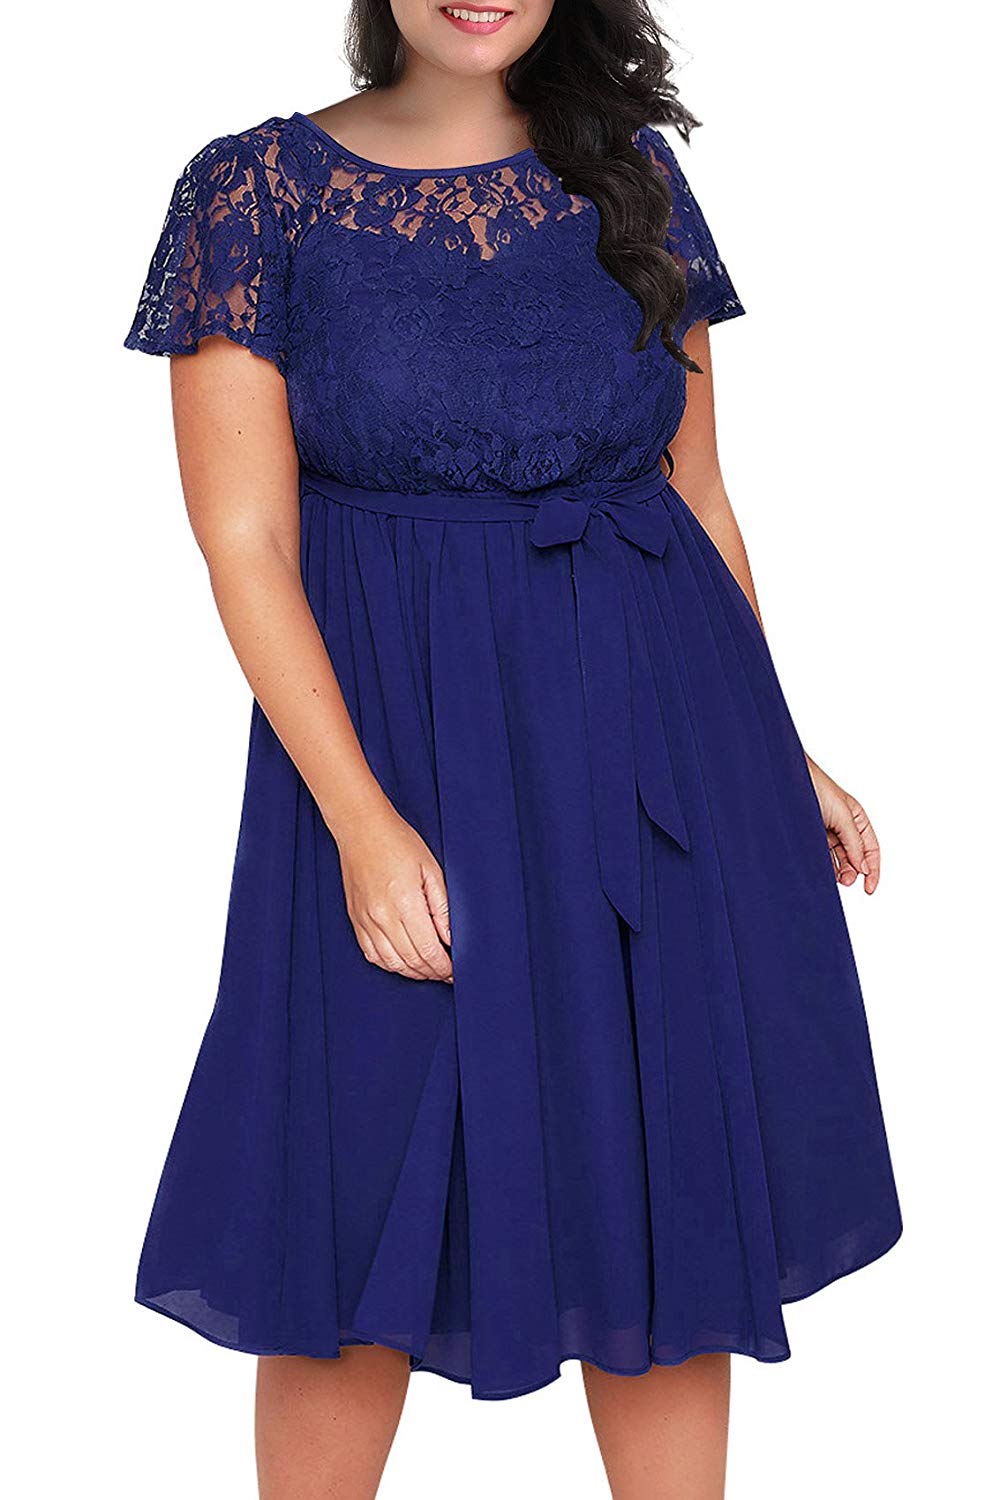 Plus Size Lace and Chiffon Wedding Guest Dresses – Angrila